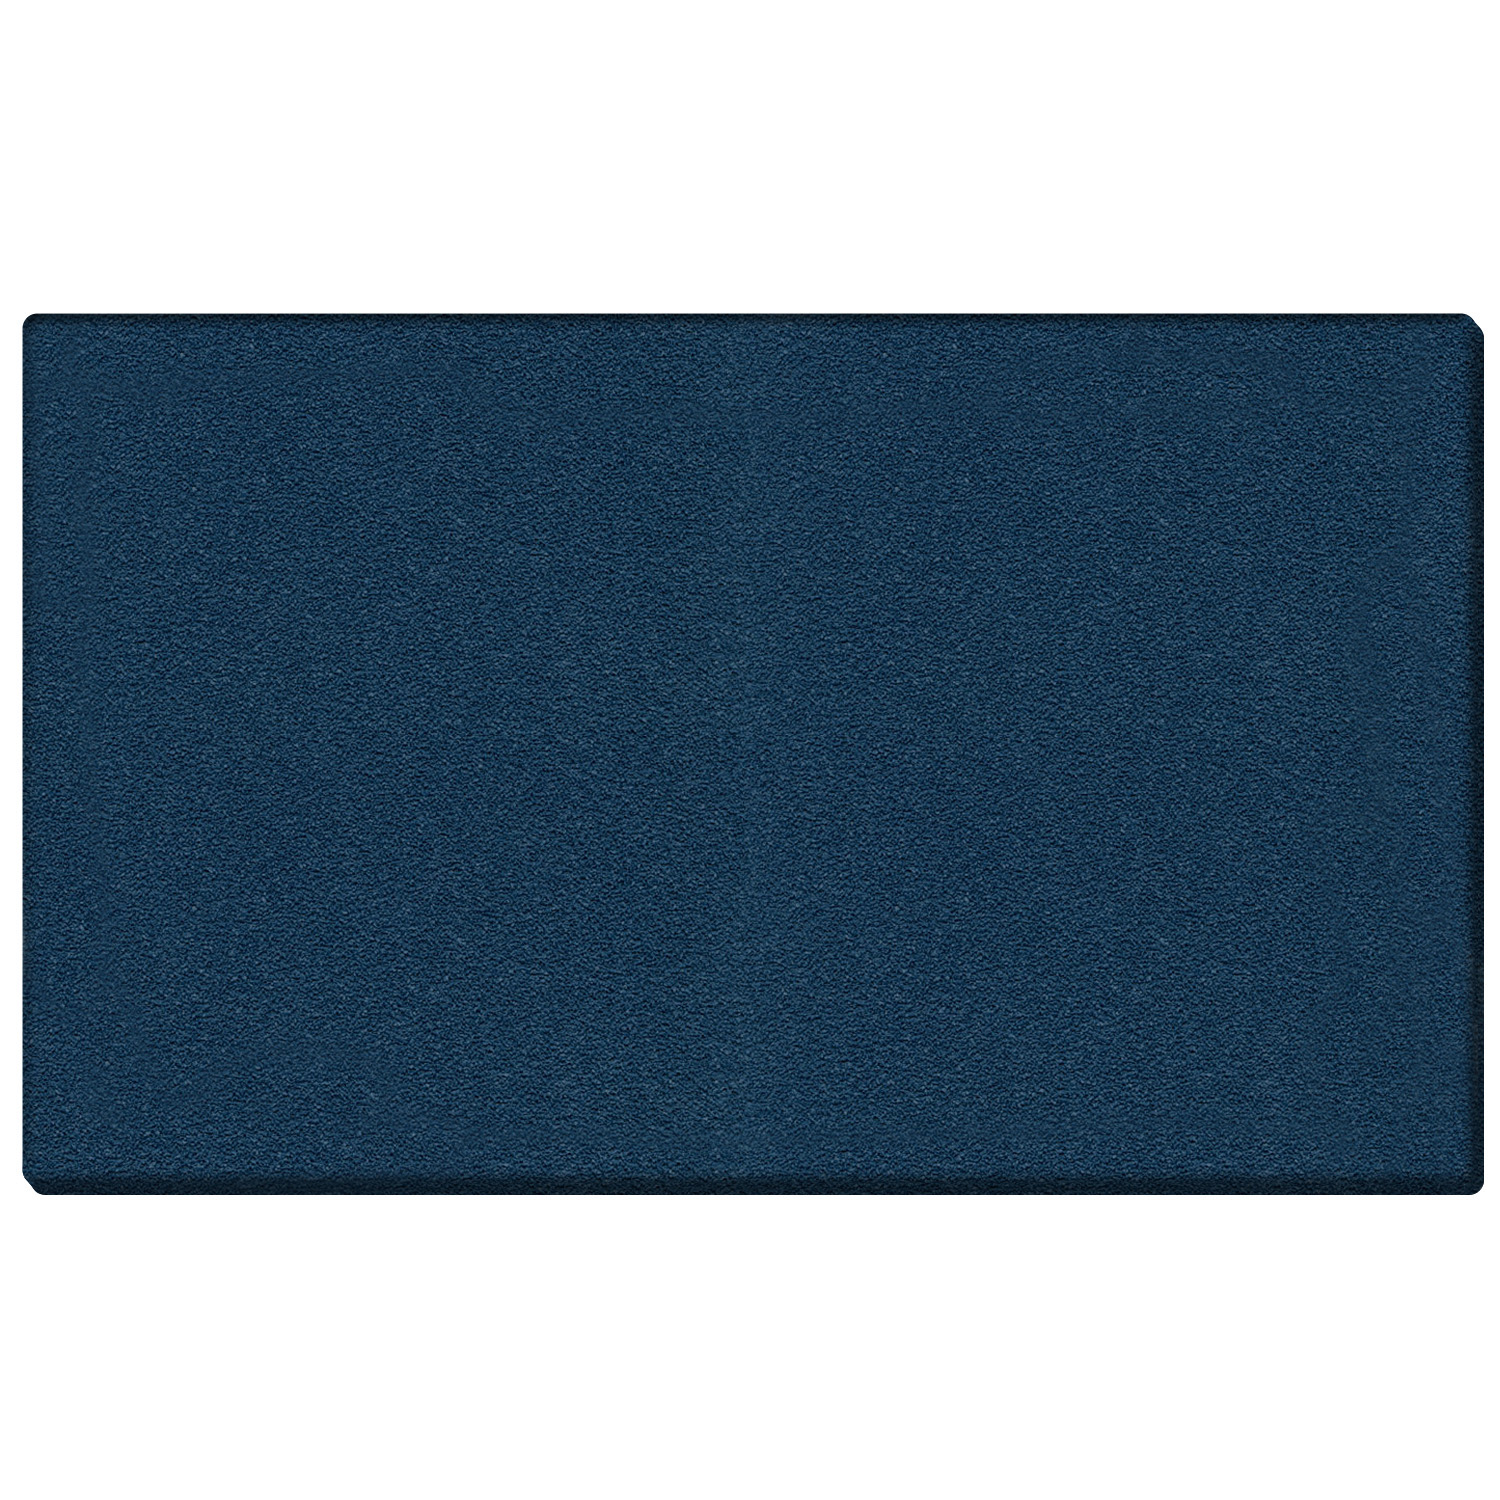 Picture of Ghent 12UV410-W195 Vinyl Tackboard - Wrapped Edge - Navy